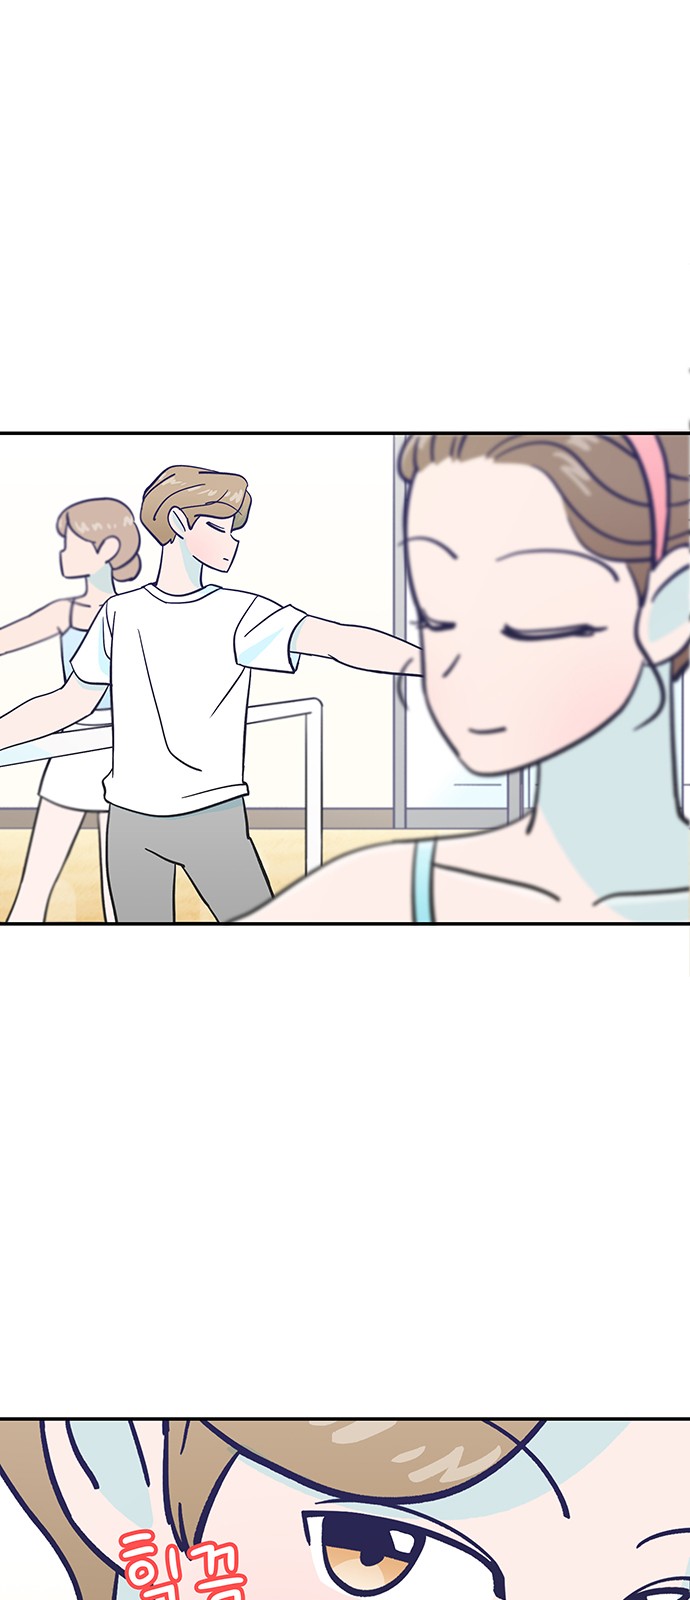 Dance School Boy - Chapter 8 - Page 4